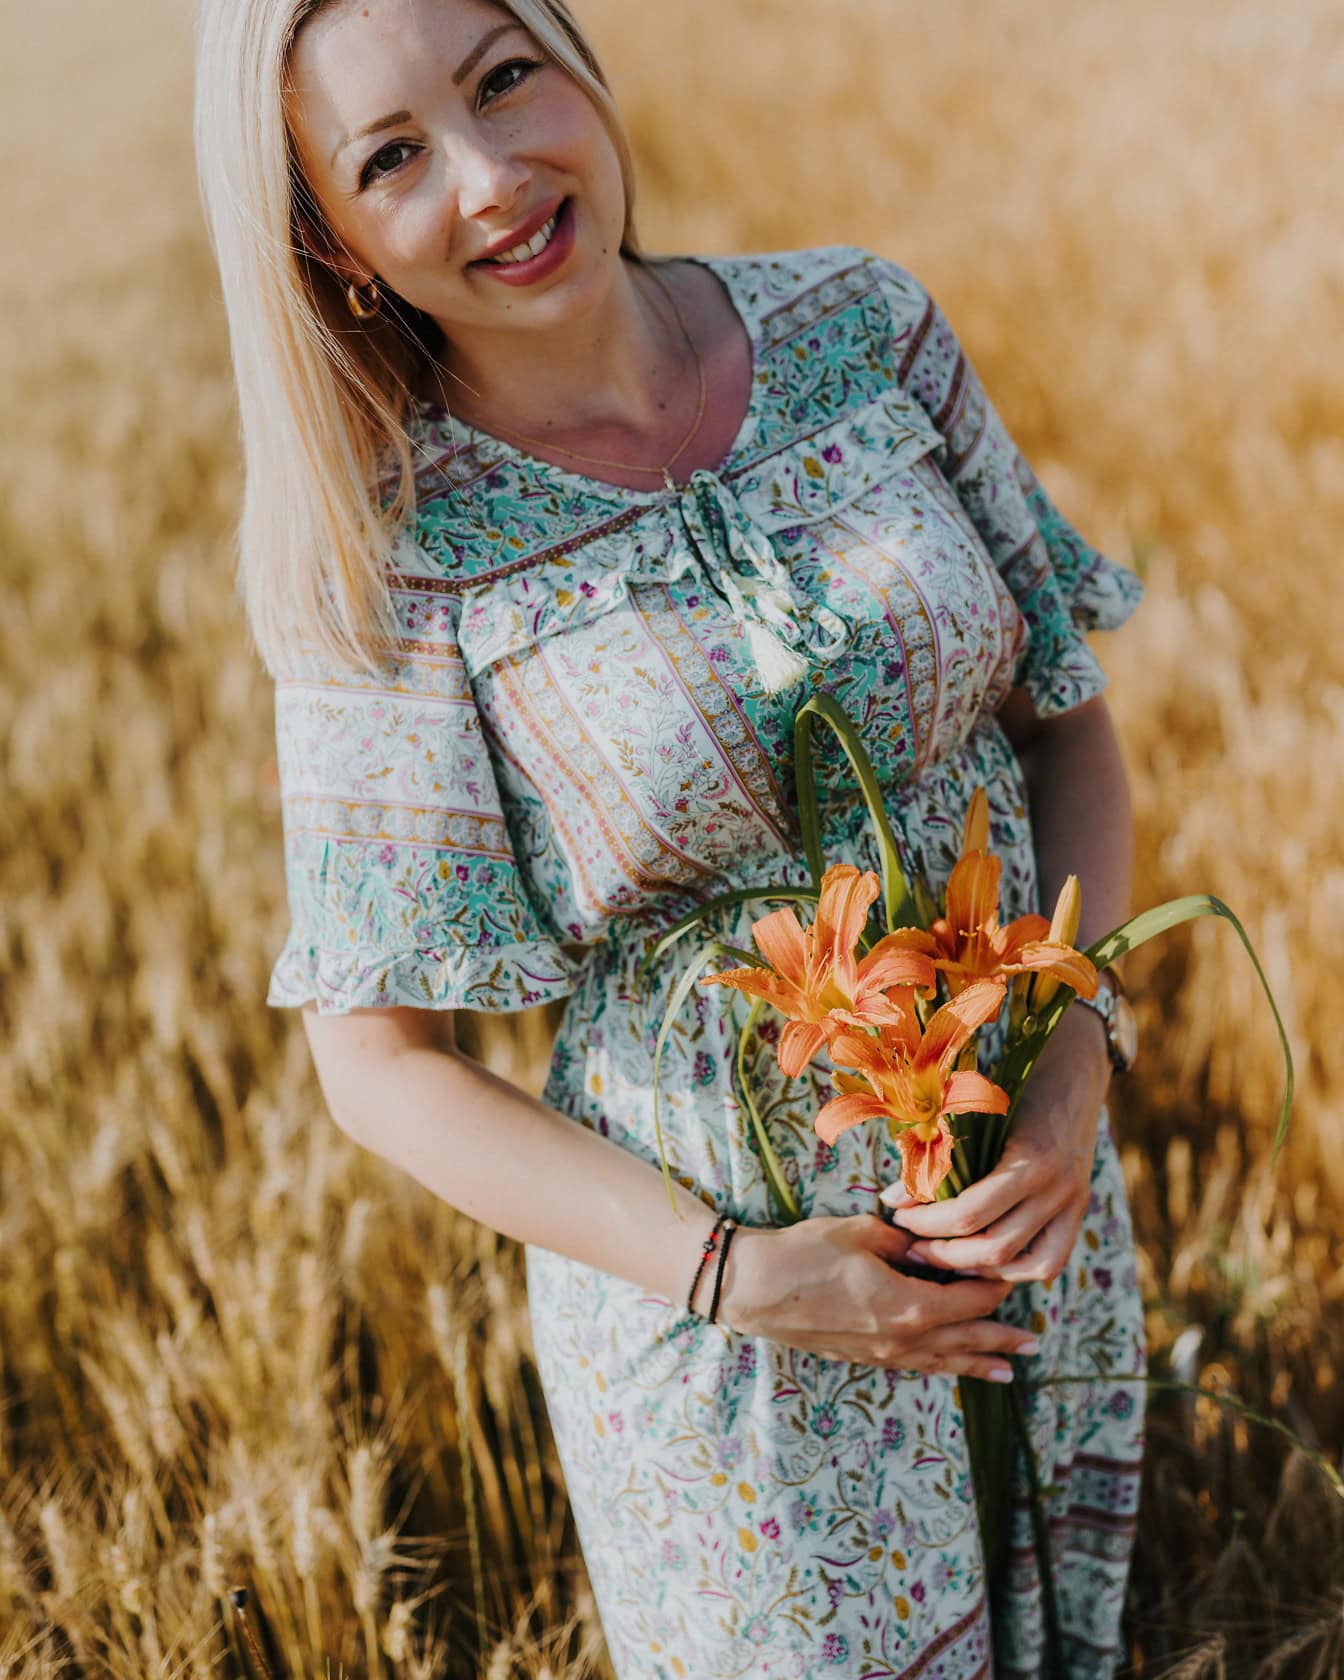 A country young woman in a floral design dress holding a bouquet of orange lily in a wheat field on a warm summer day